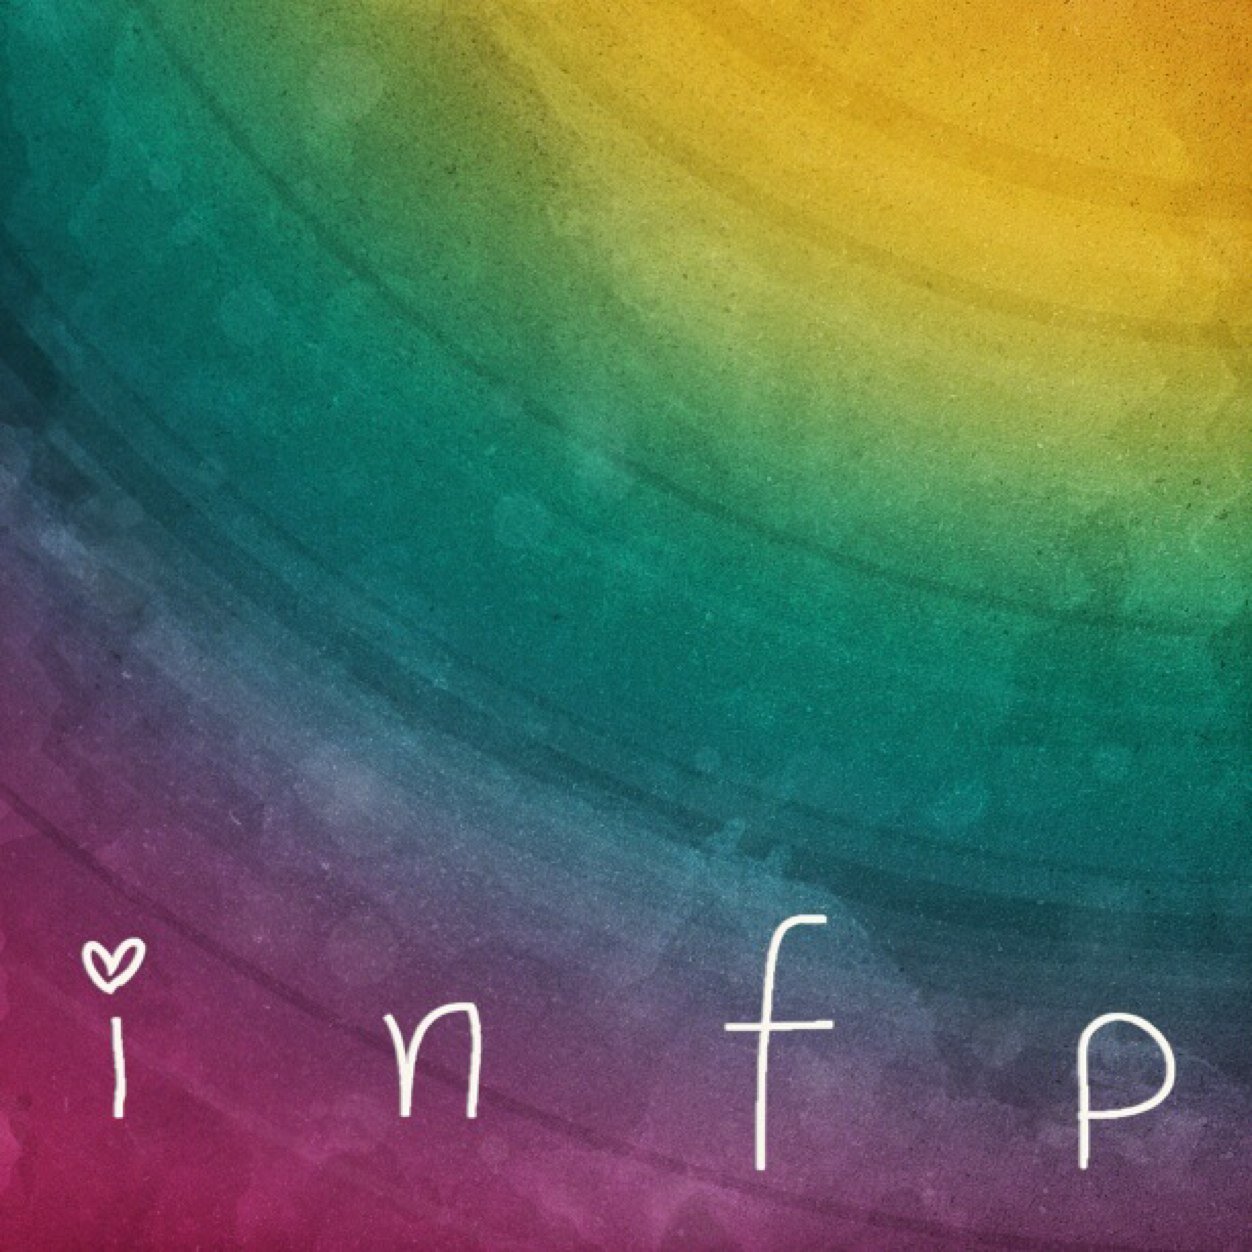 enneagram type 4 and INFP info and quotes!